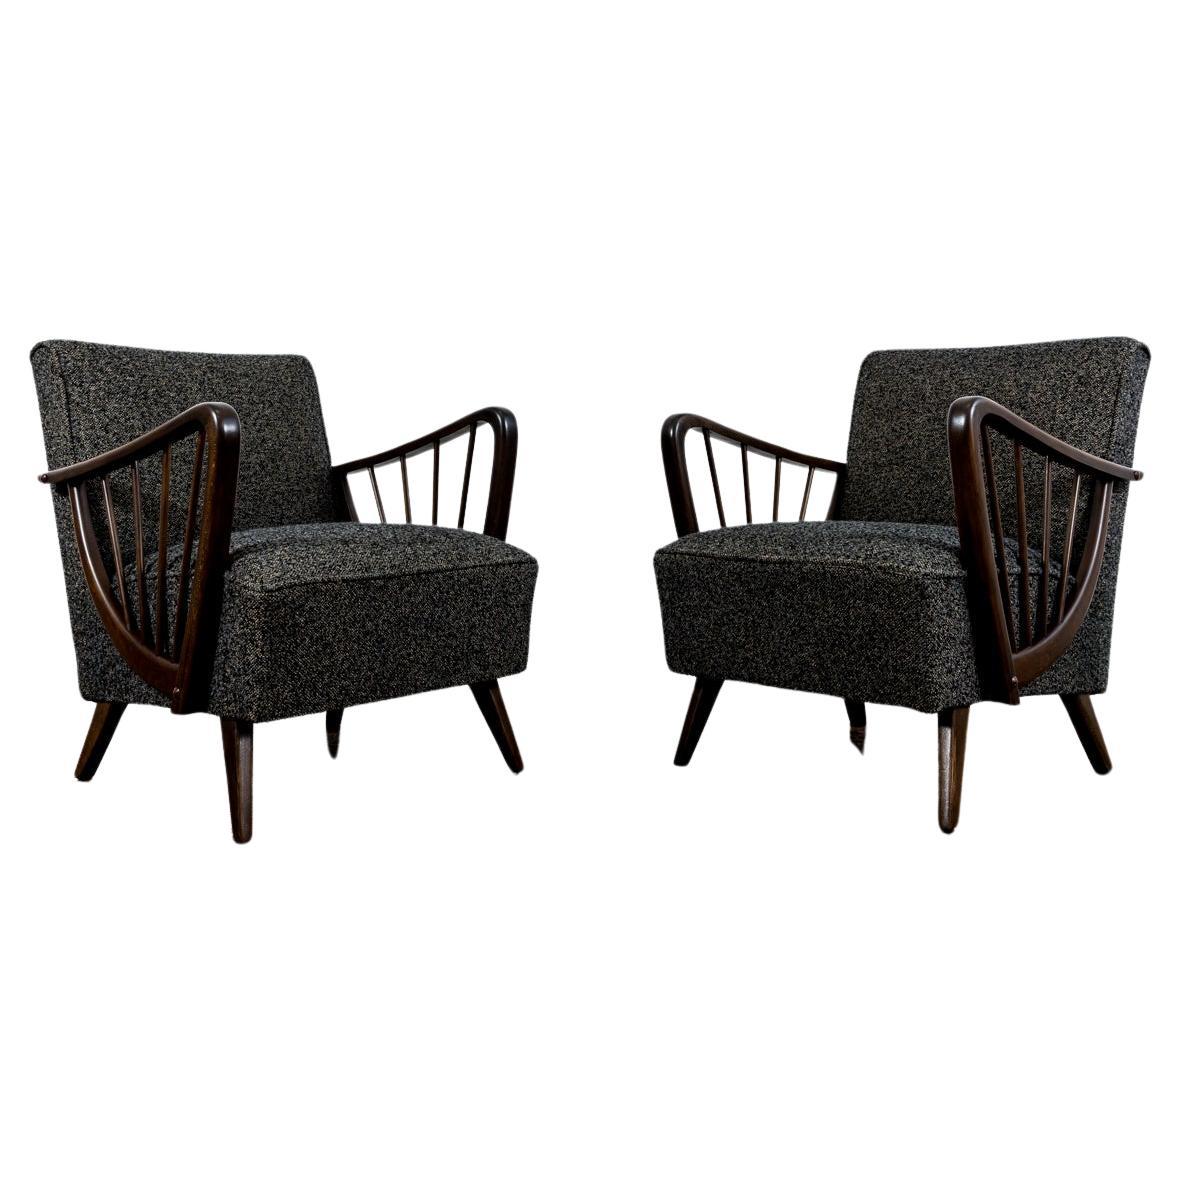 Pair of large Mid-Century armchairs 1950's Germany.
Solid wood legs and harp-shaped armrest have been completely restored and refinished.
Reupholstered in high quality black grey boucle type of fabric.